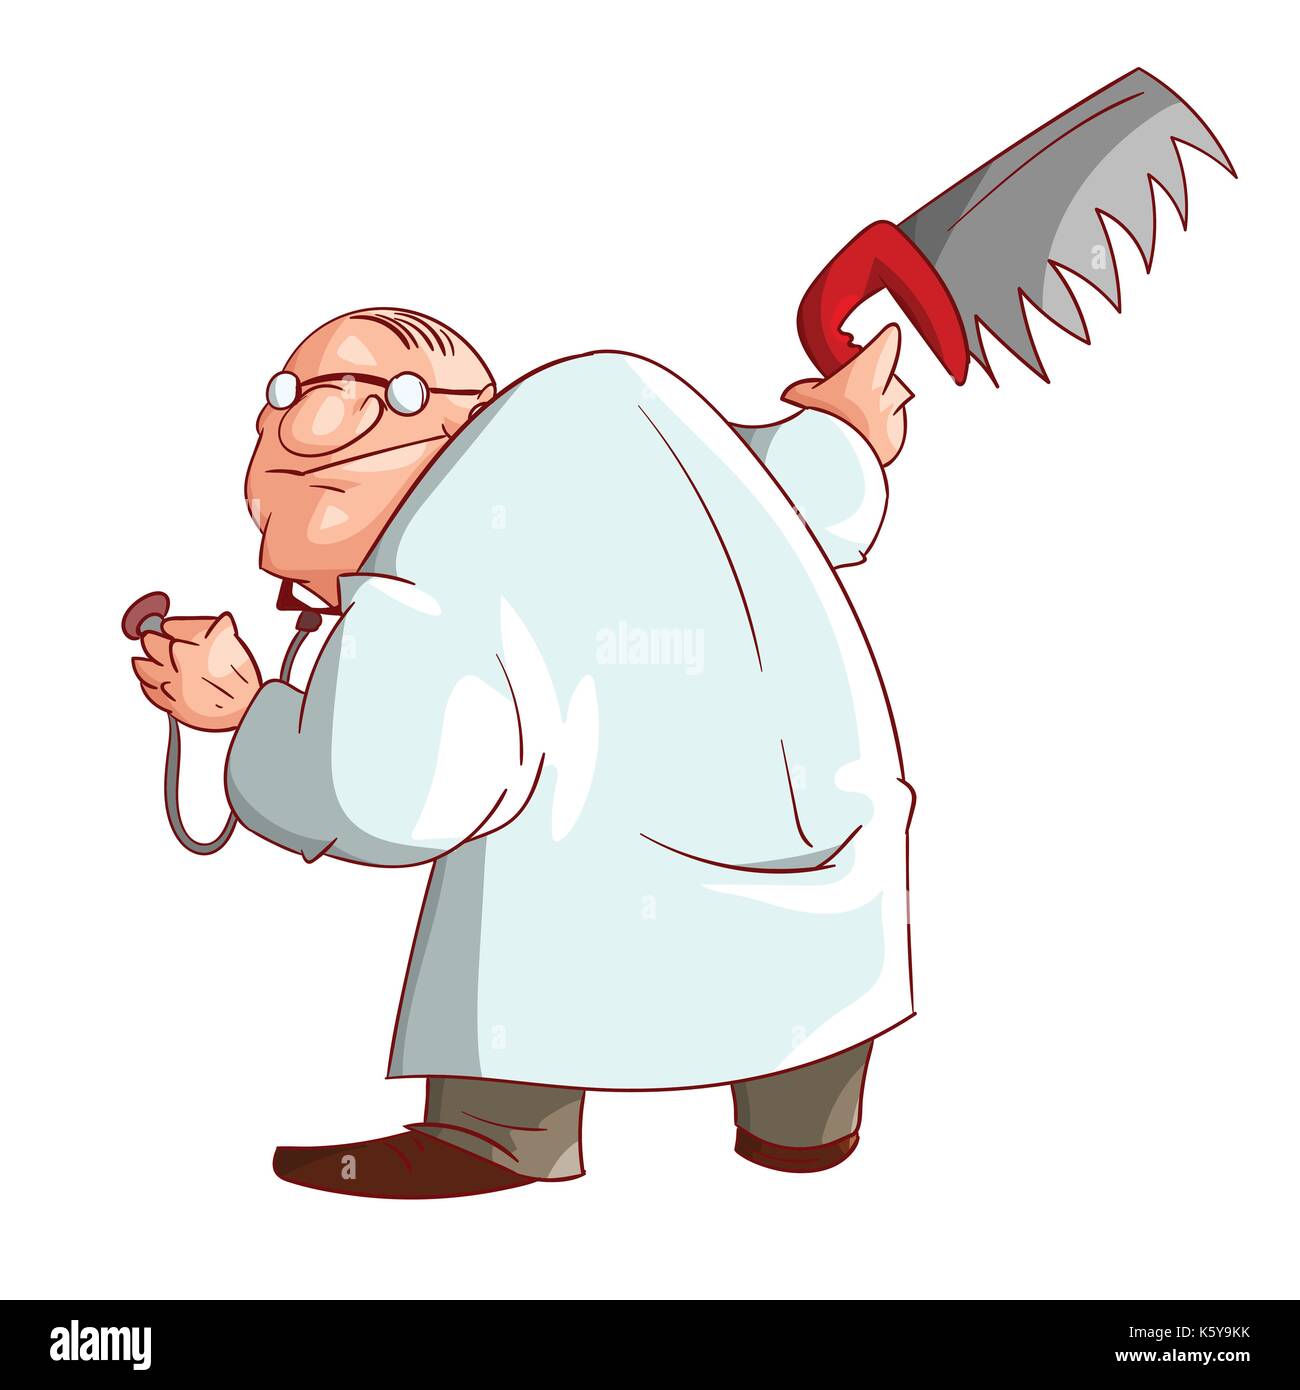 Colorful vector illustration of a cartoon crazy doctor Stock Vector